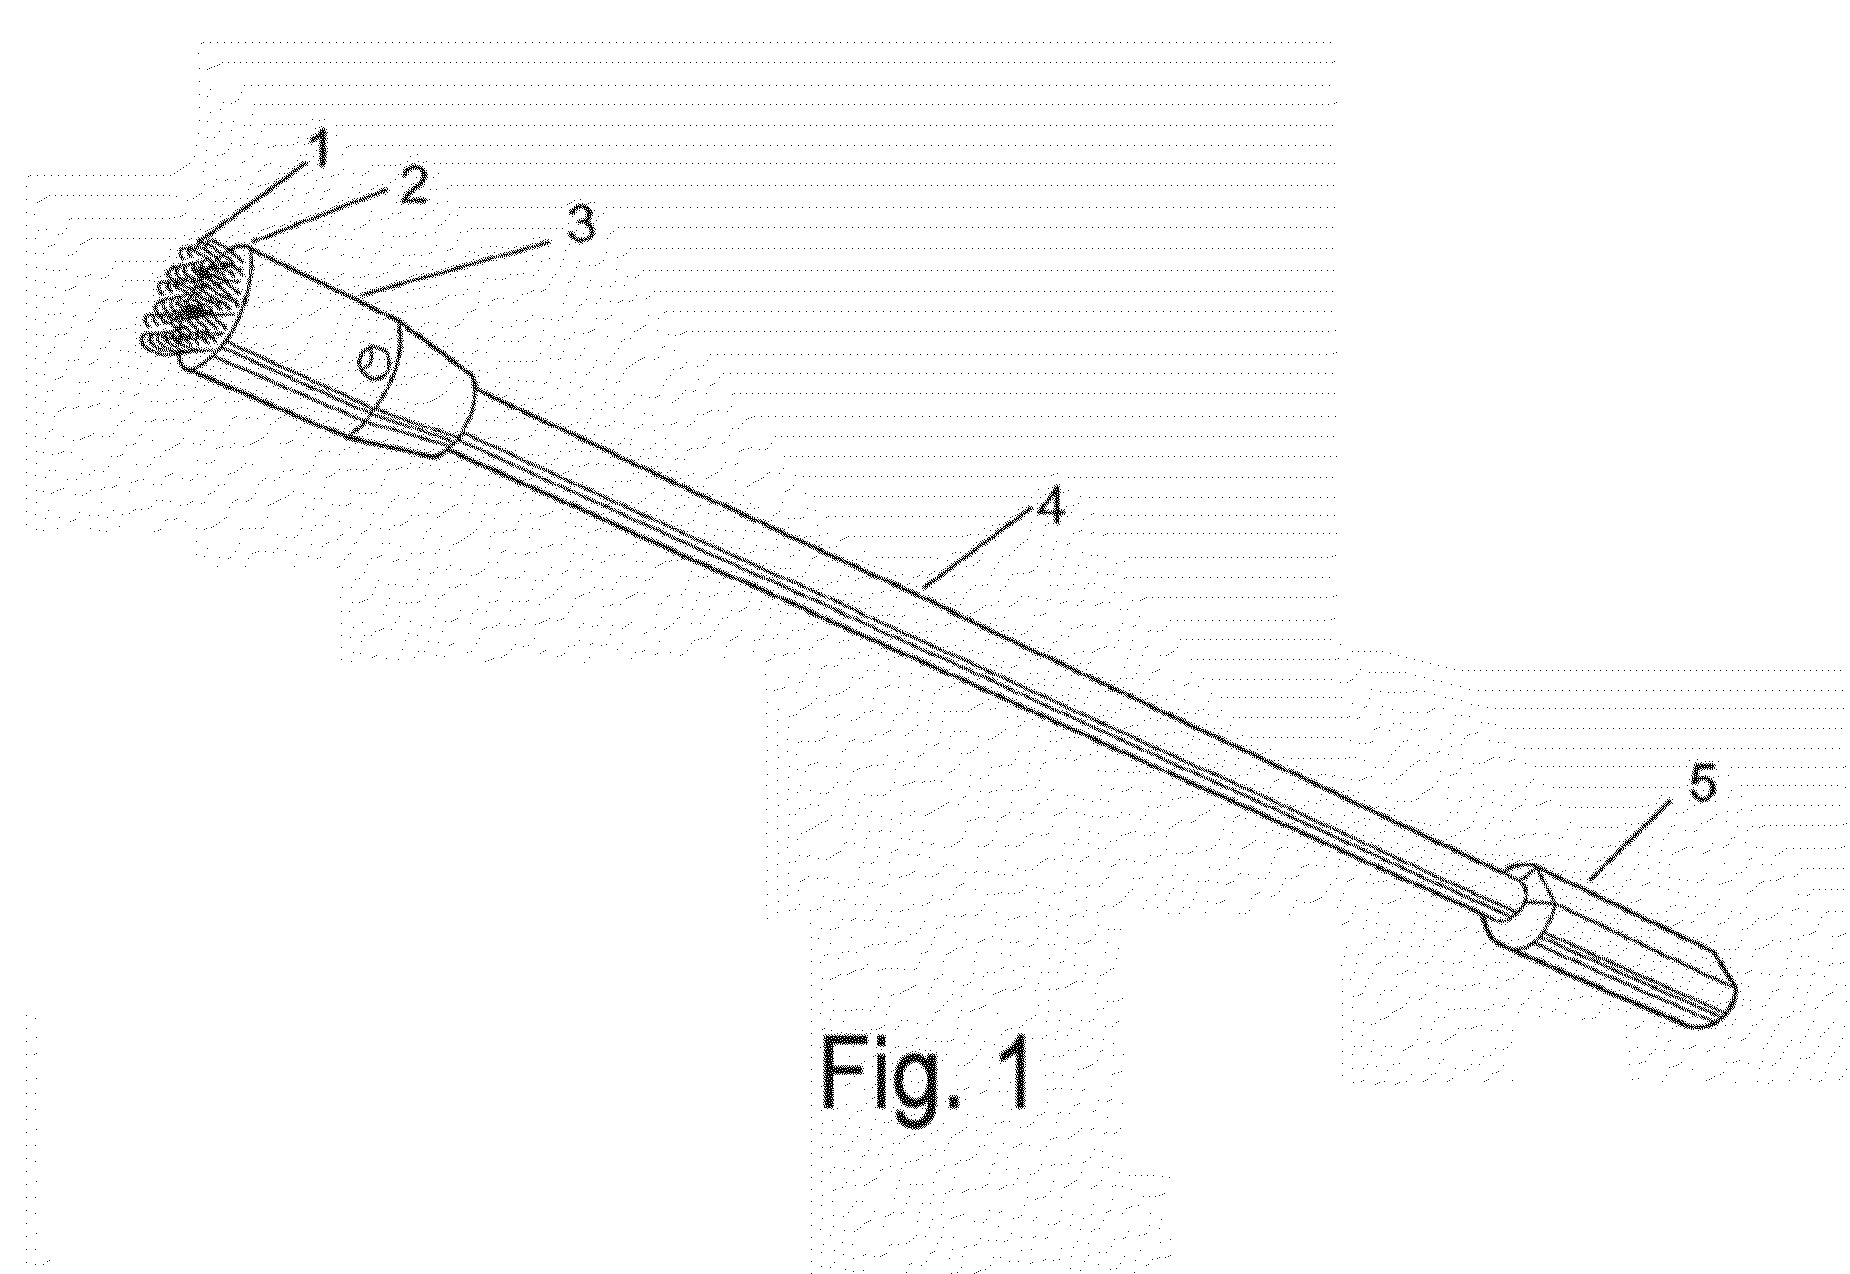 Frictional tissue sampling and collection method and device